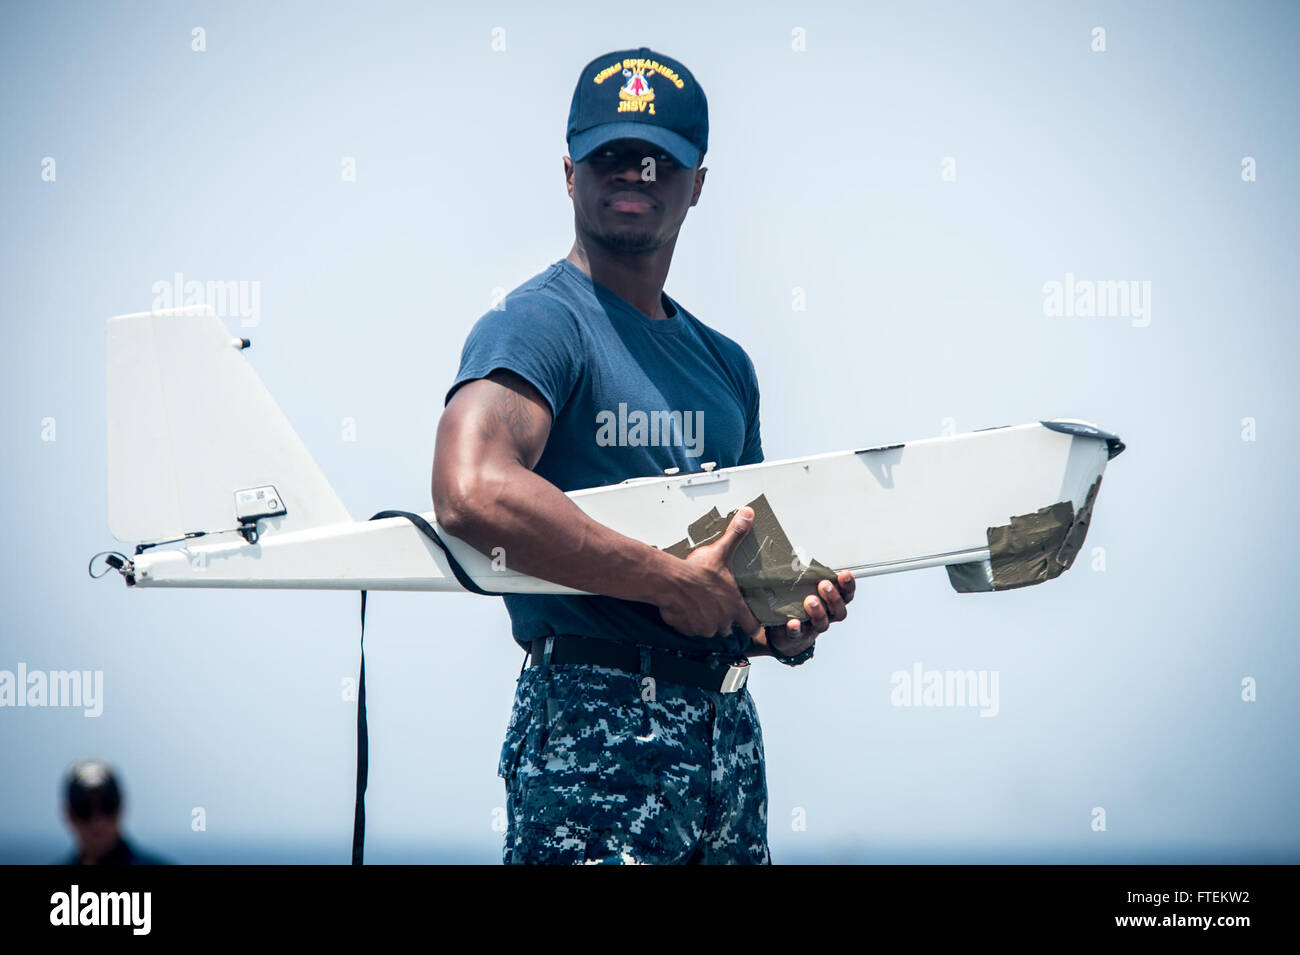 ATLANTIC OCEAN (Feb. 10, 2015) Information Systems Technician 3rd Class Marquise Simmons, from Summerville, South Carolina,  prepares an RQ-20A  Aqua Puma small unmanned aircraft system for launch aboard the Military Sealift Command’s joint high-speed vessel USNS Spearhead (JHSV 1) Feb. 10, 2015. Spearhead is on a scheduled deployment to the U.S. 6th Fleet area of operations to support the international collaborative capacity-building program Africa Partnership Station (APS). (U.S. Navy photo by Mass Communication Specialist 2nd Class Kenan O’Connor/Released) Stock Photo